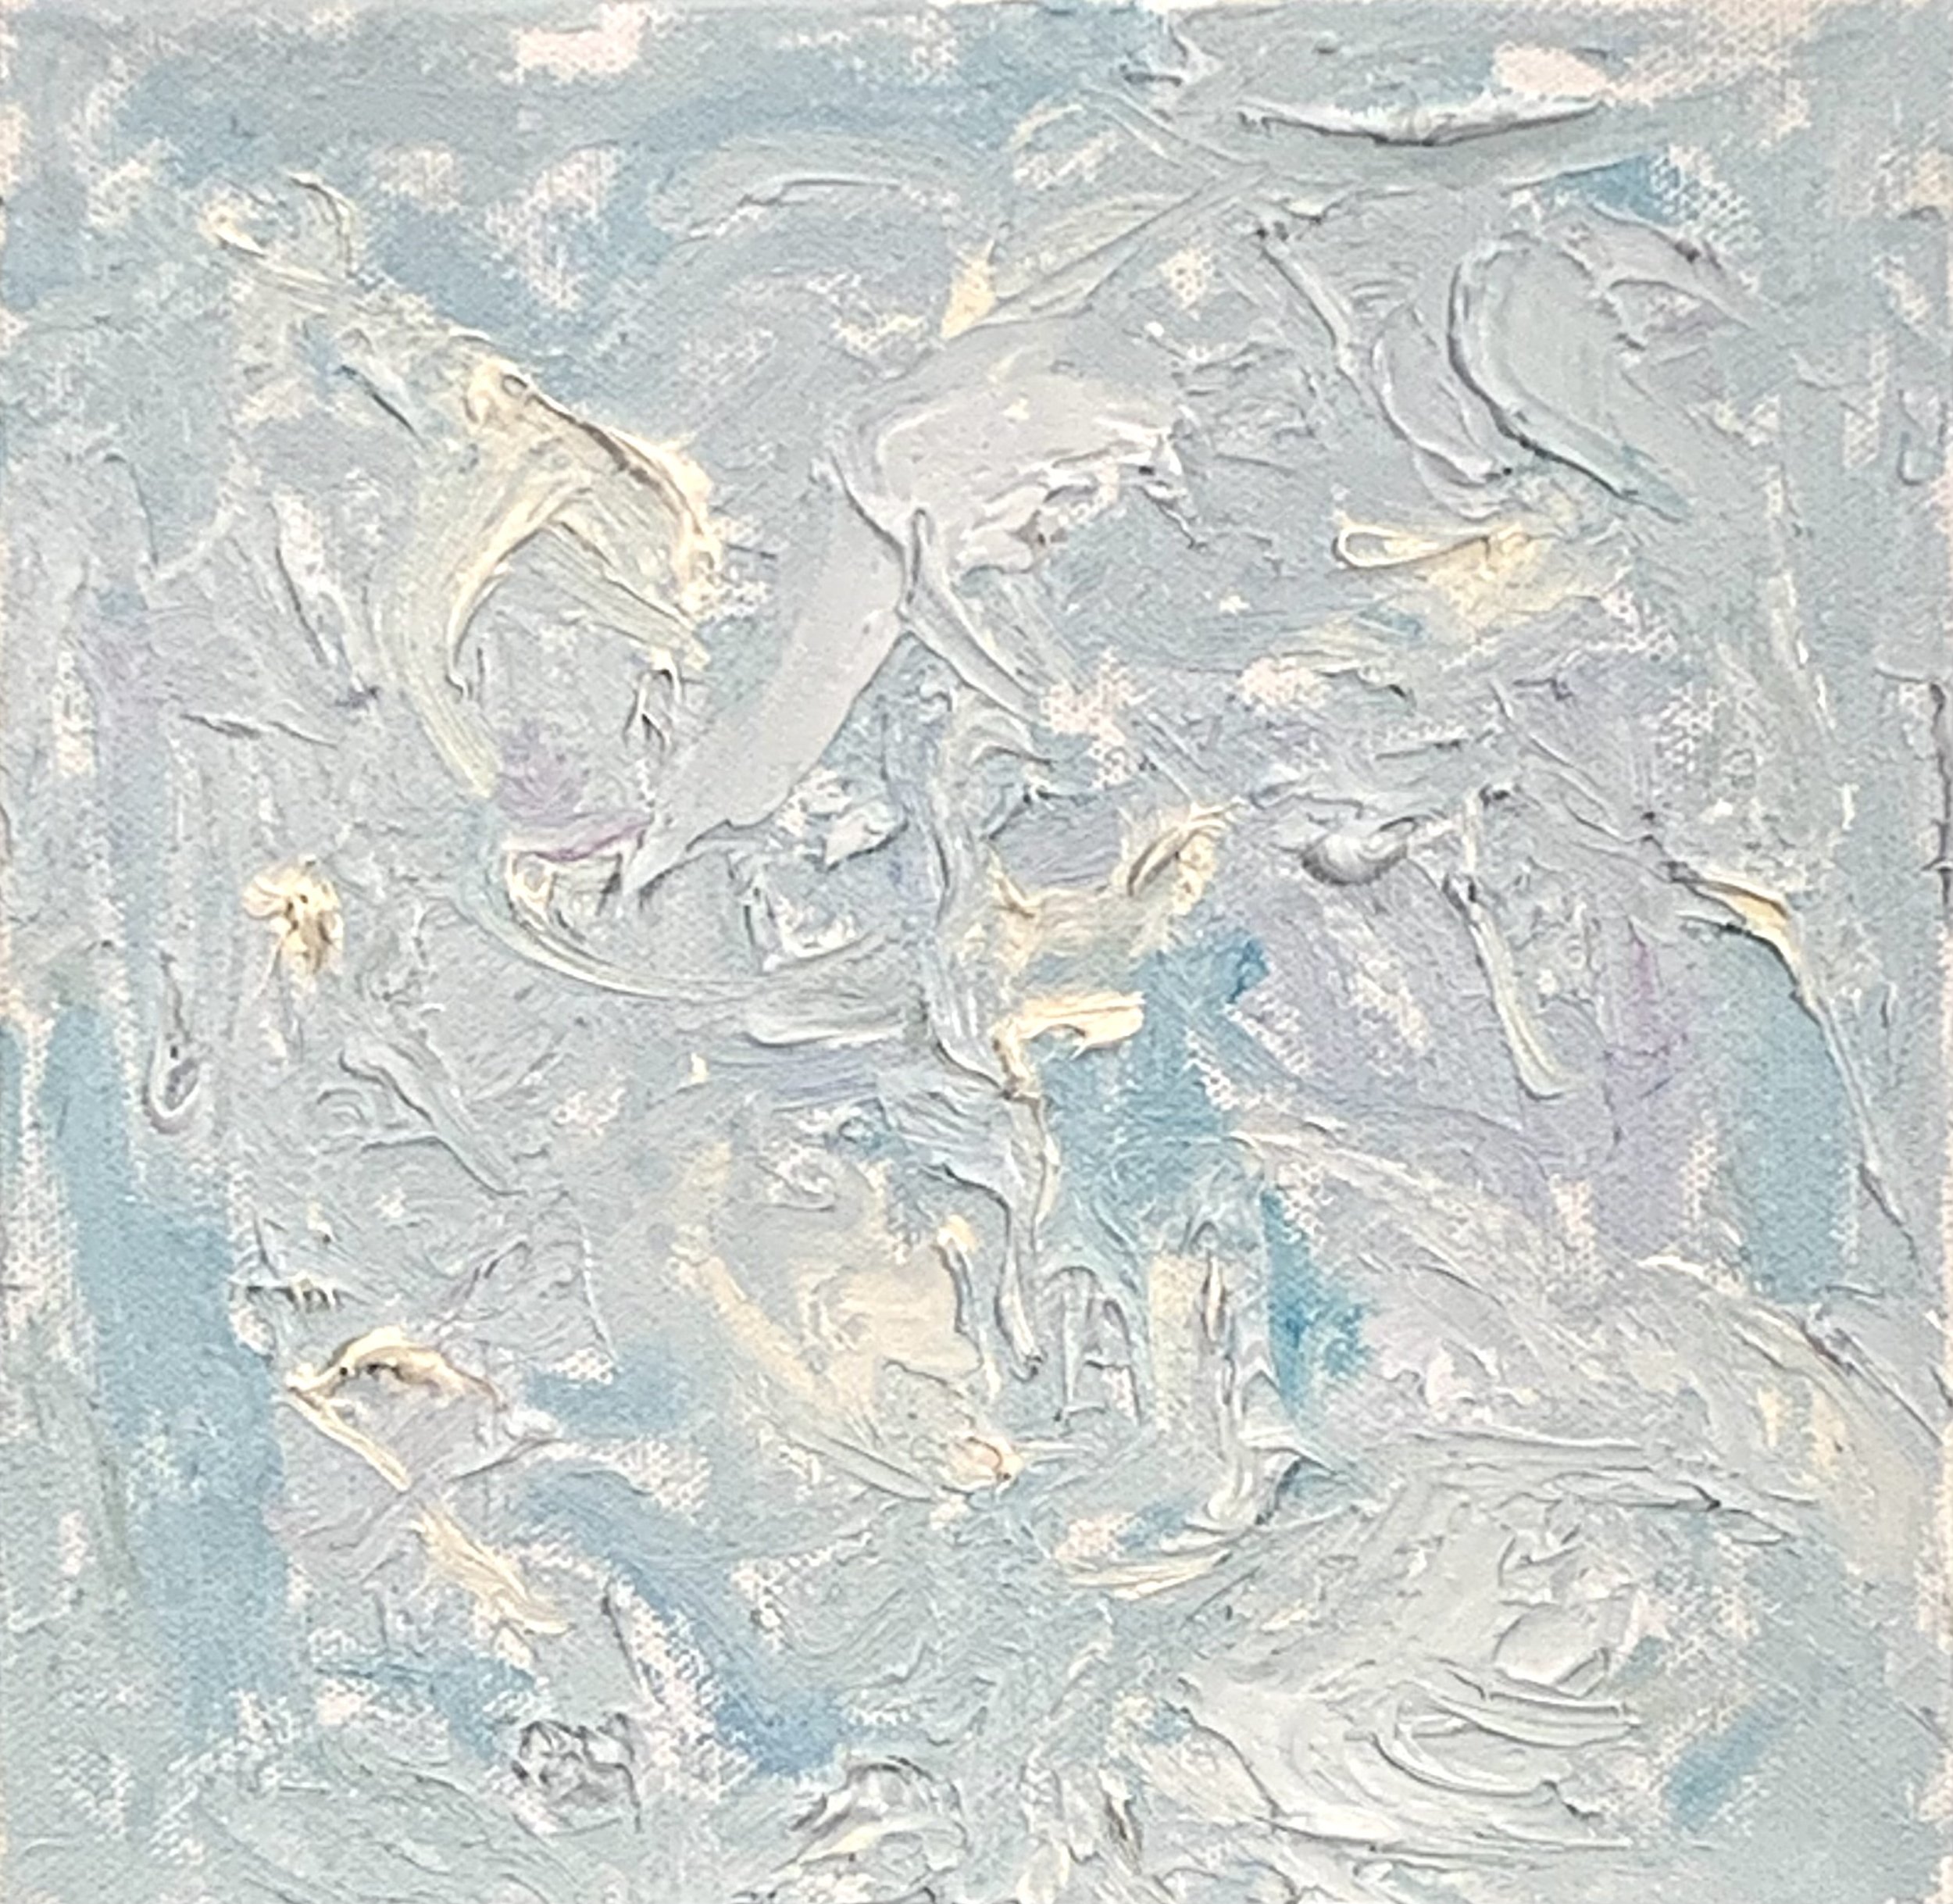 “Air & Clouds (3) No. 22, oil on canvas